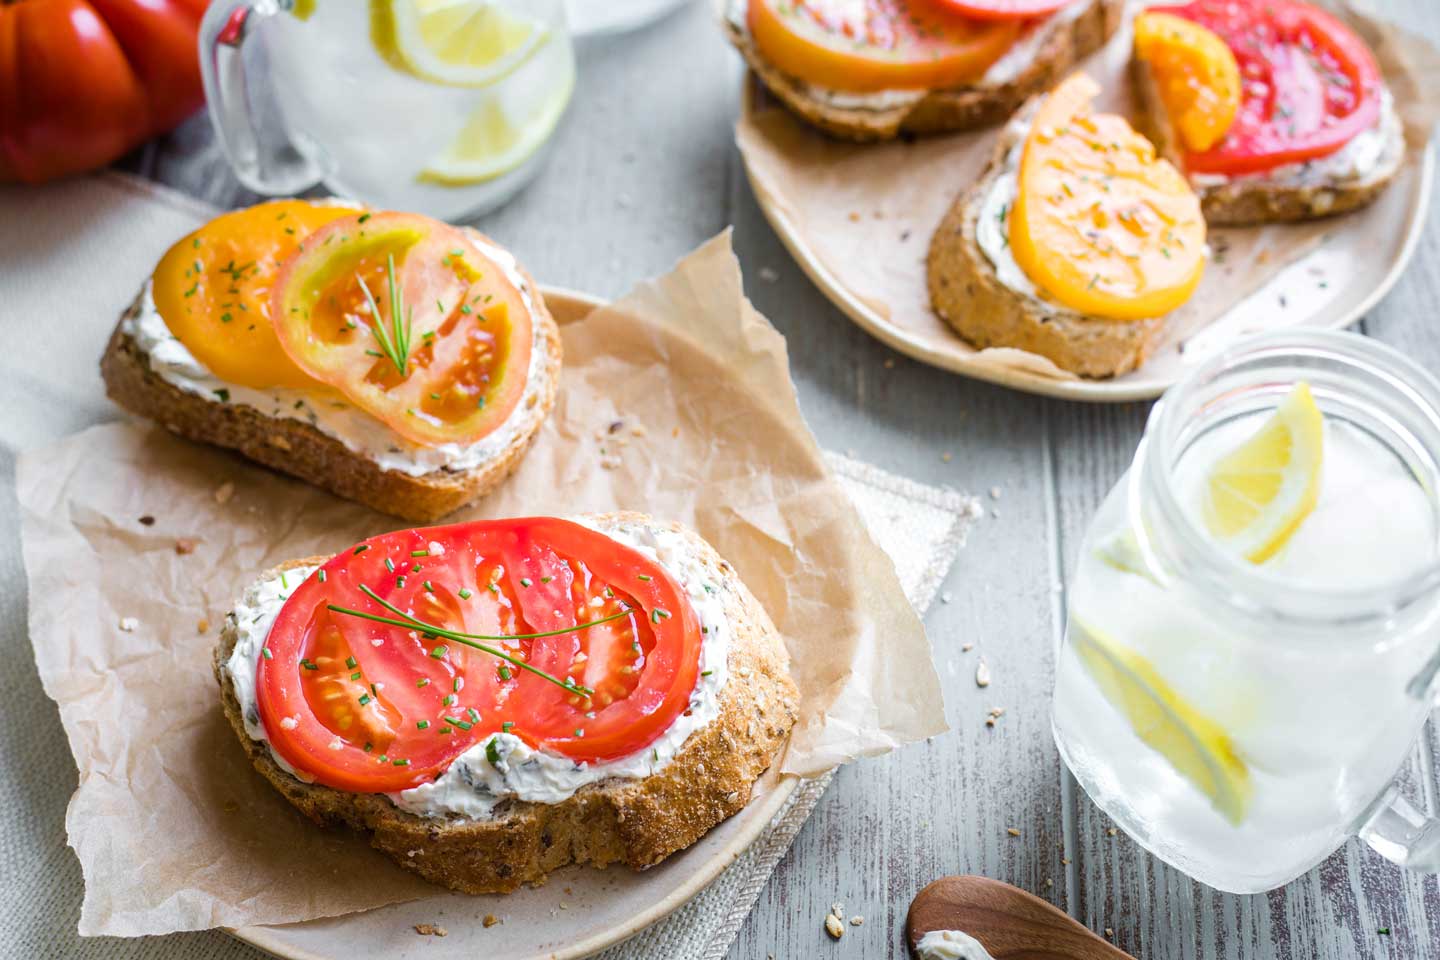 two open-faced tomato sandwiches on a plate, with others on platter in background and cold drinks at the side